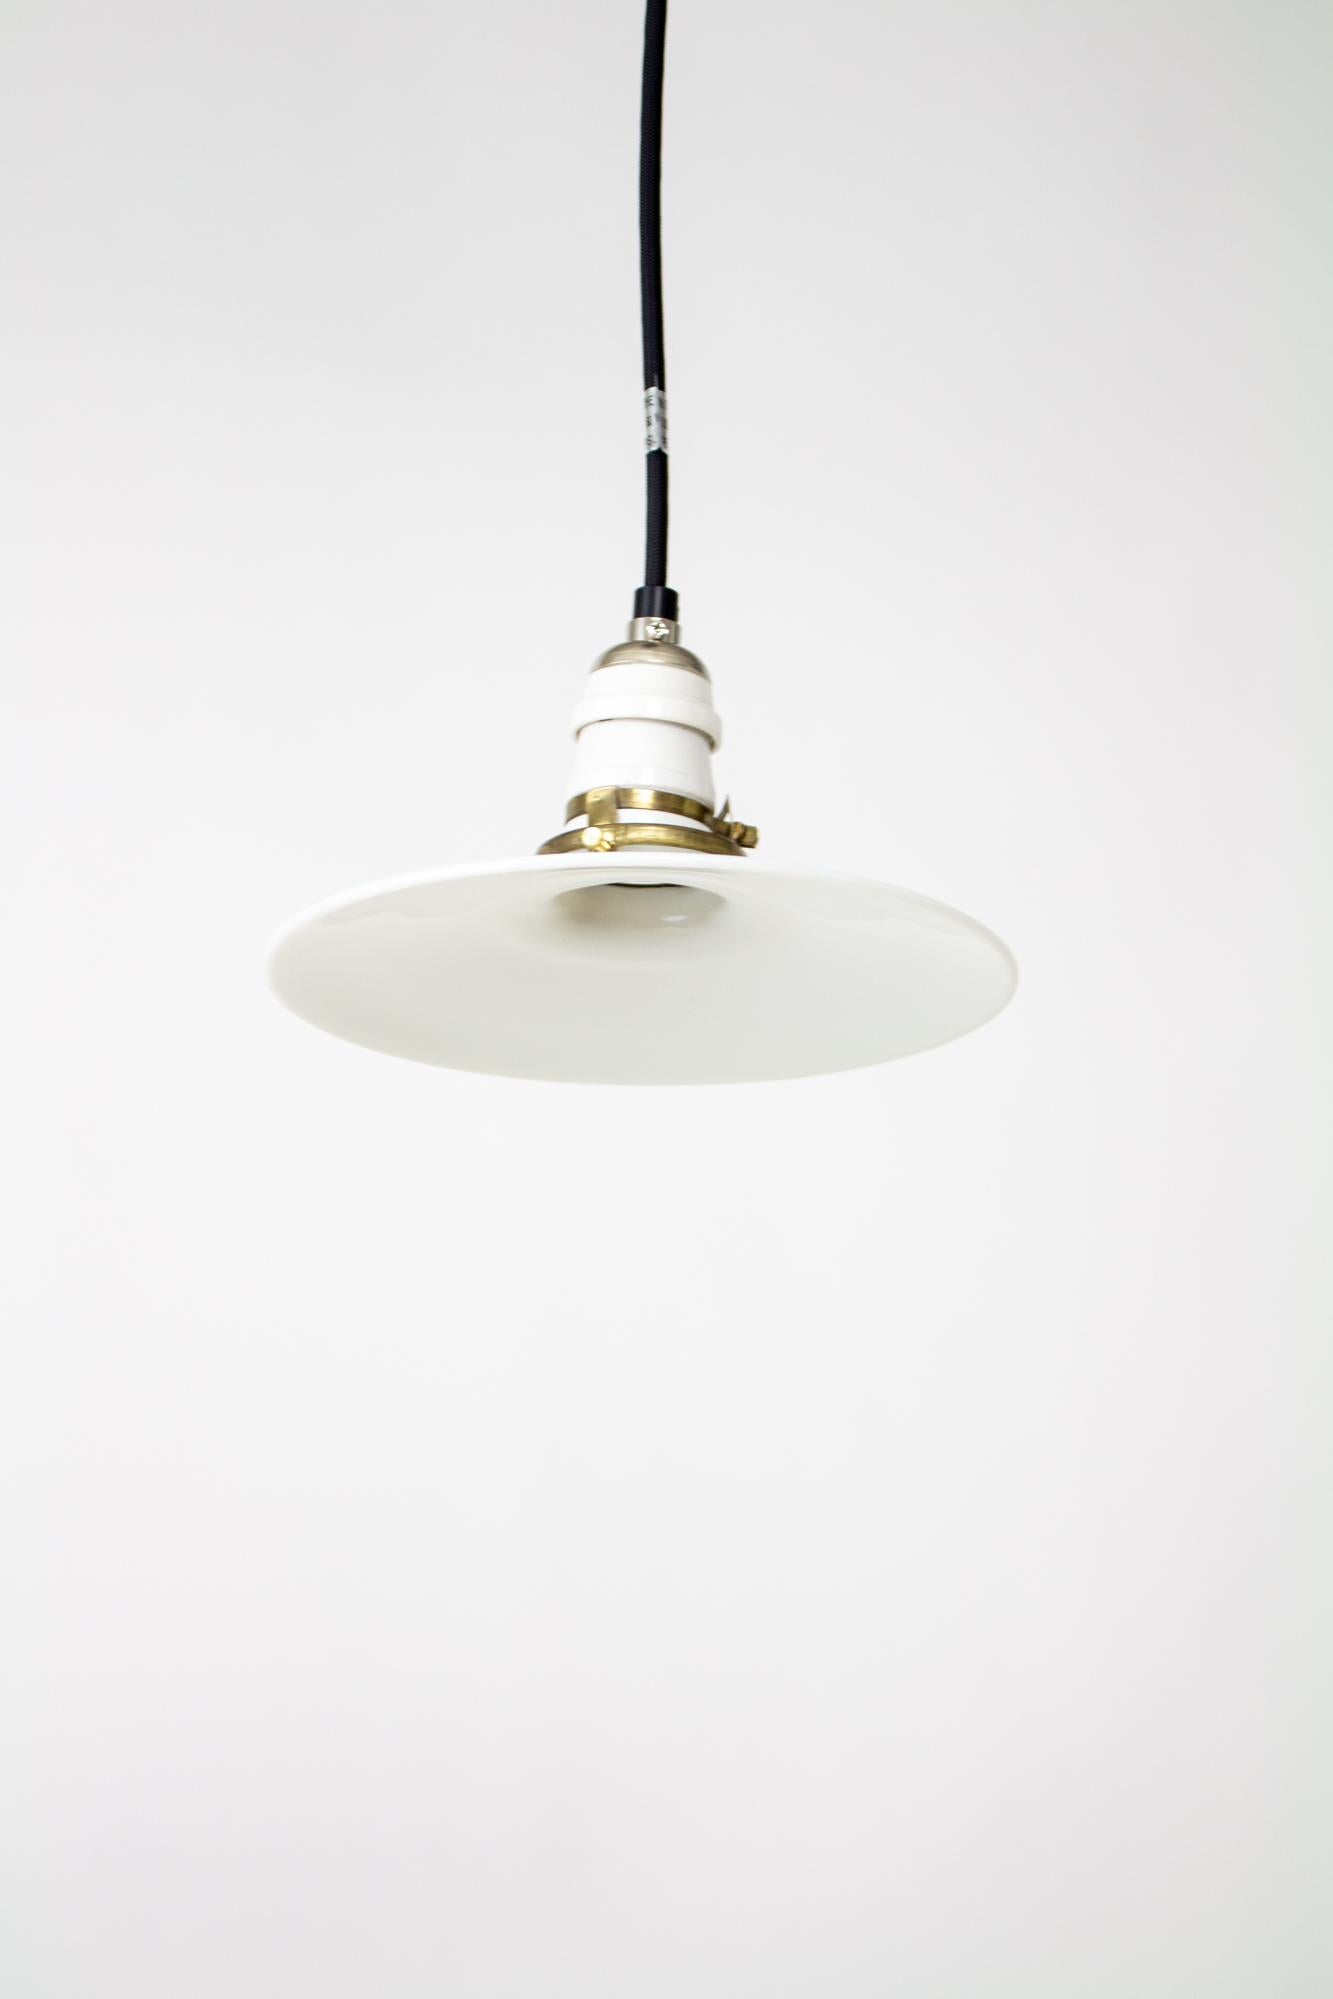 Early 20th century industrial white disk pendant. Black cord and canopy, porcelain antique style socket, antique clamp fitter and milk glass disk shade. Shown with Edison style bulb as a style suggestion, bulb is not included. Fixture is adjustable